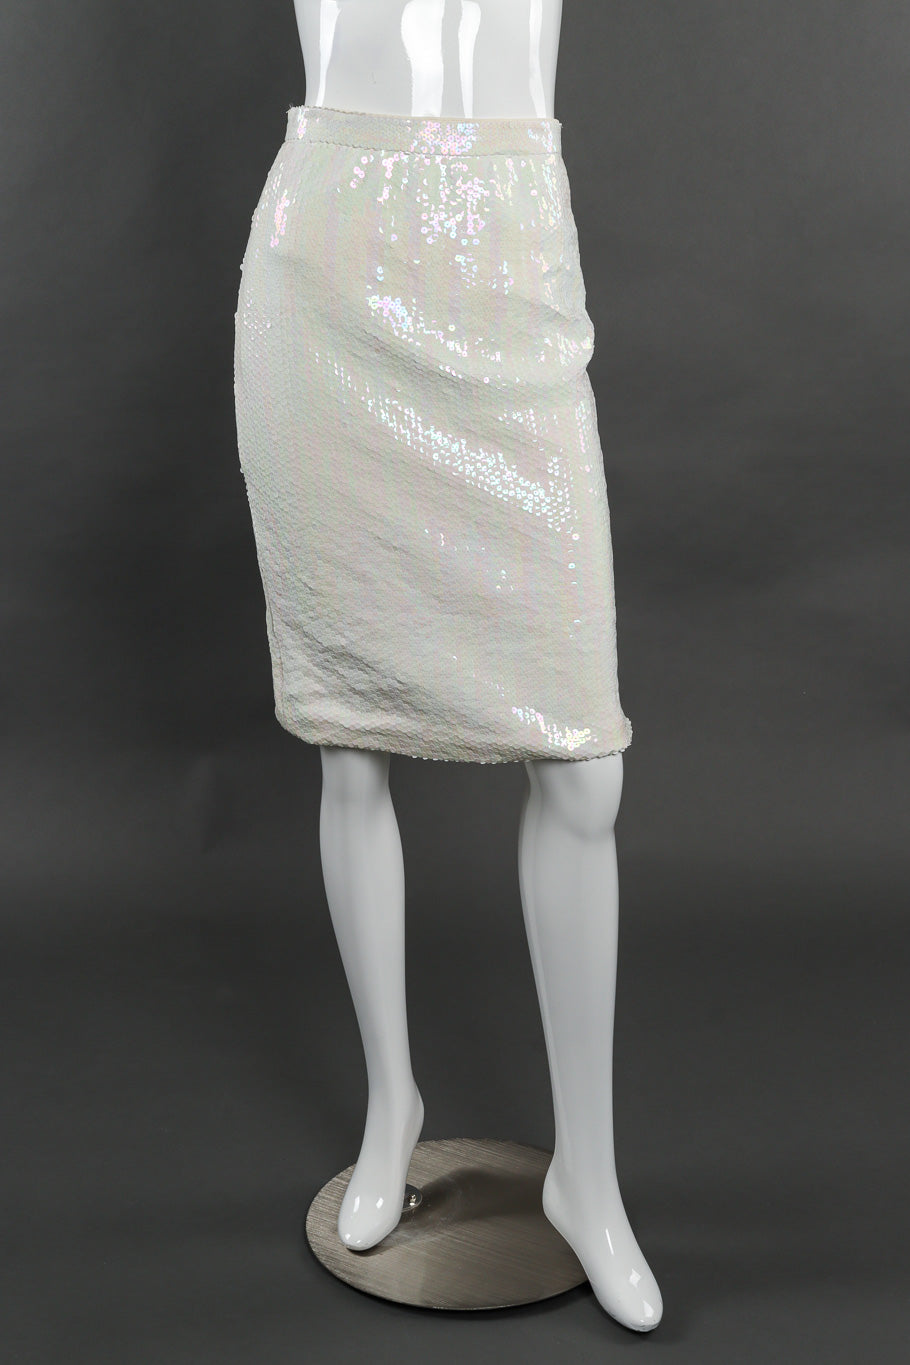  Jacket and skirt set by Julie Duroche on mannequin skirt only front  @recessla 